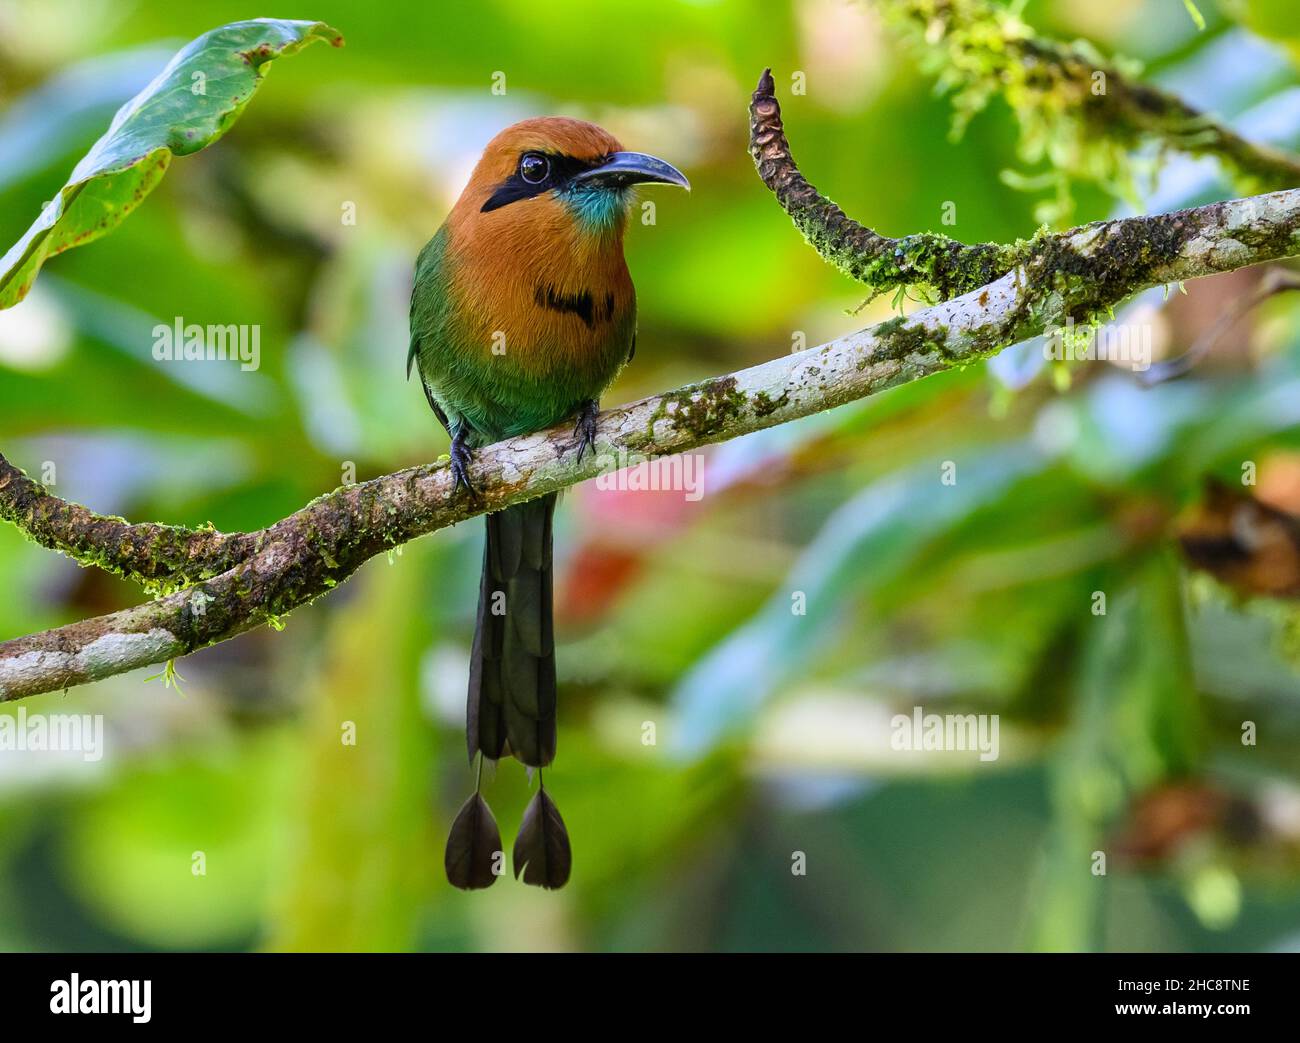 A Broad-billed Motmot (Electron platyrhynchum) perched on a branch. Costa Rica. Stock Photo